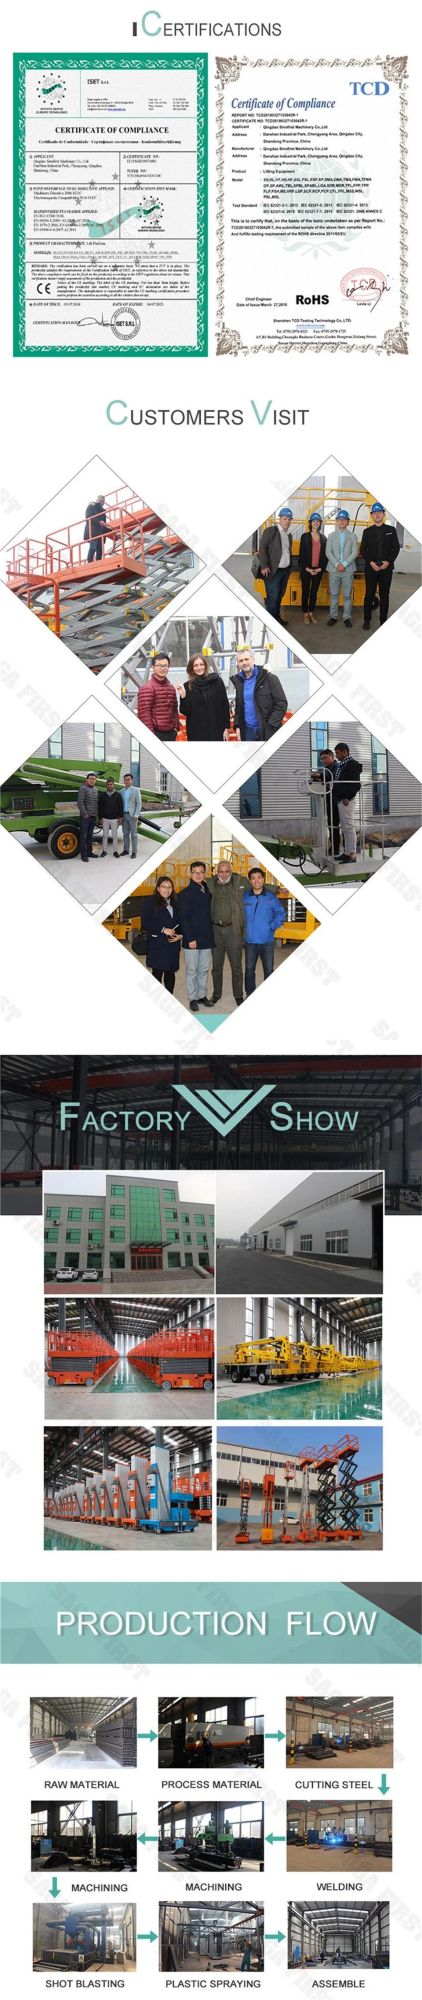 10m to 16m Mobile Hydraulic Vehicle Mounted Aerial Elevator